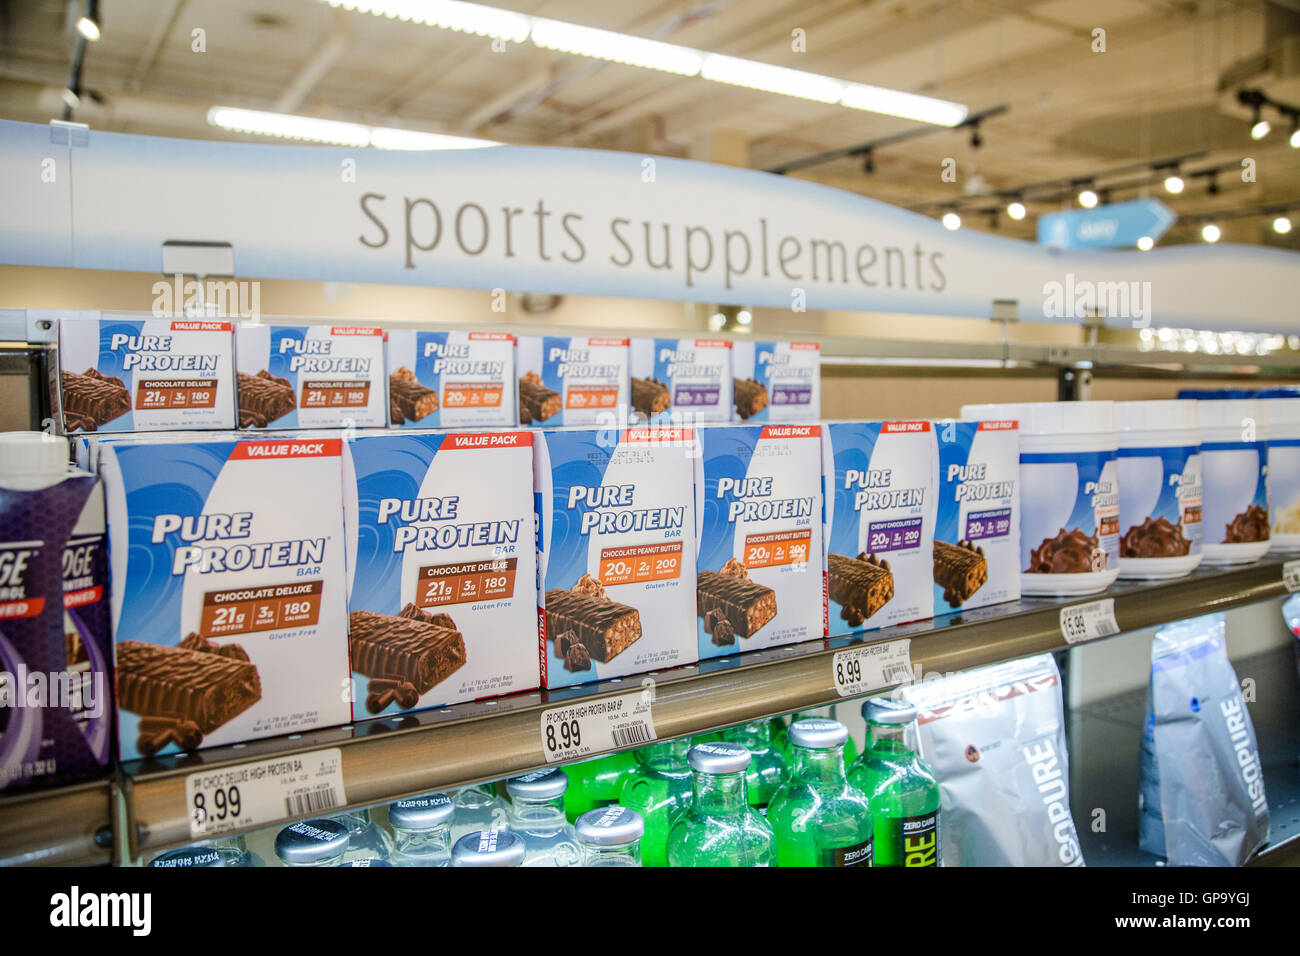 Boxes of Pure Protein brand protein bars in the sports supplements section of a drug store Stock Photo